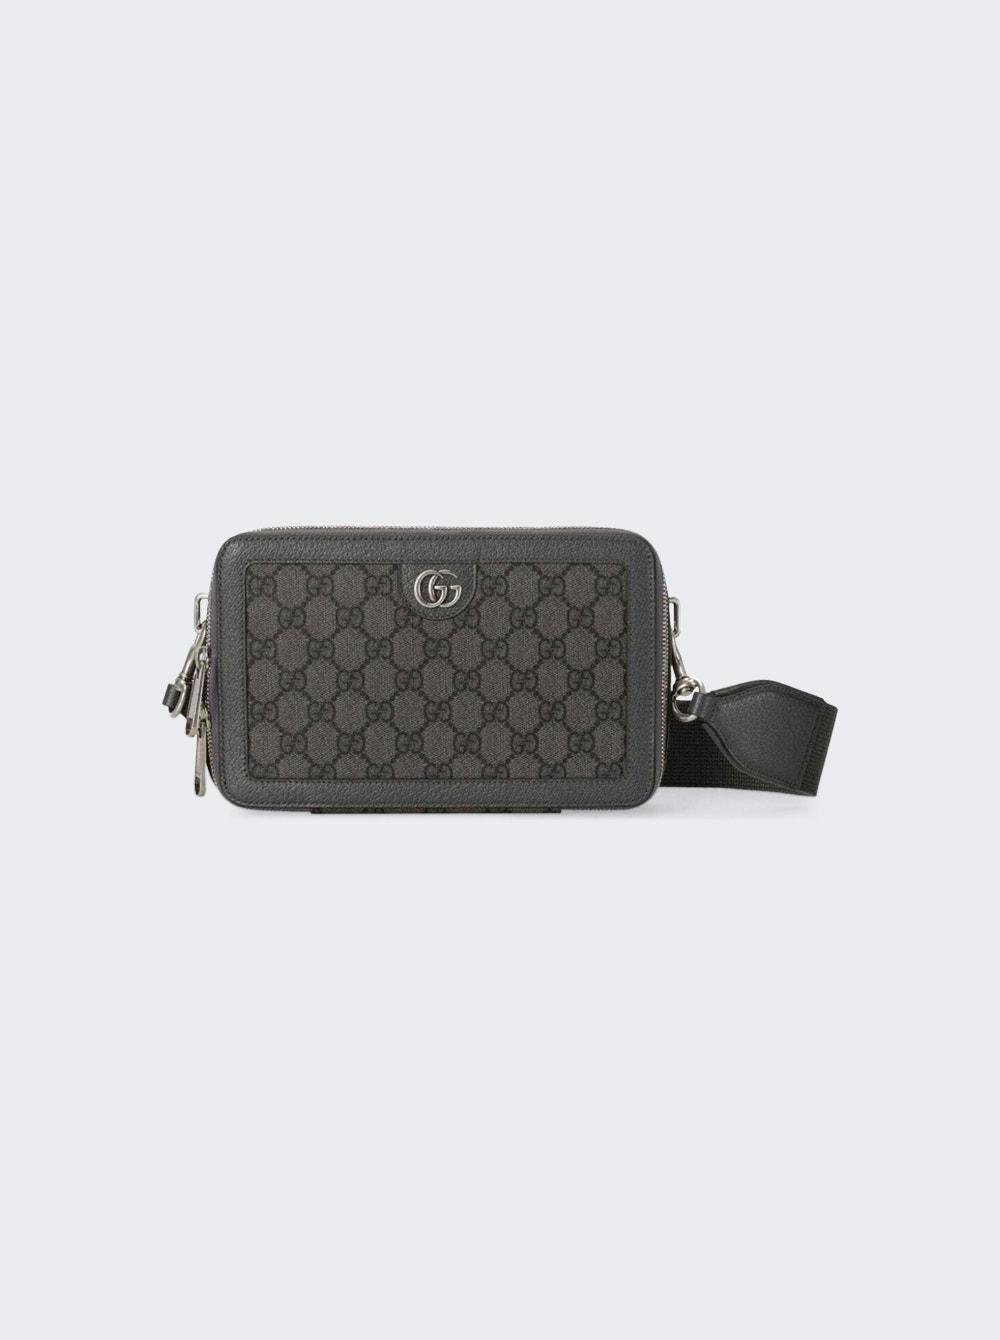 Ophidia Gg Mini Bag Grey  | The Webster by GUCCI